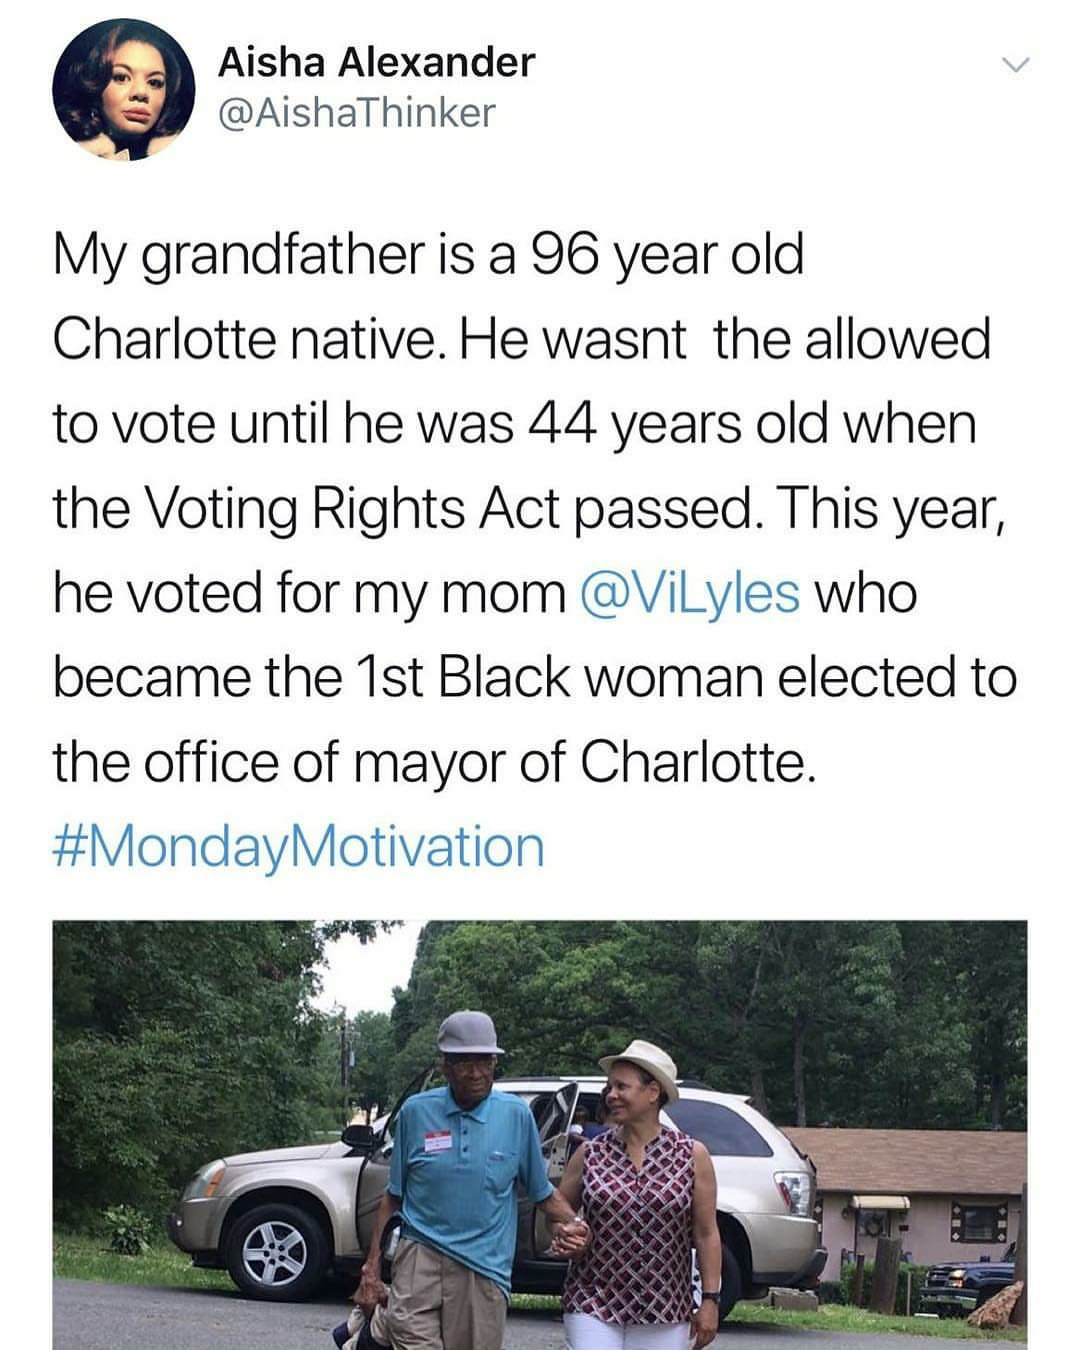 grass - Aisha Alexander My grandfather is a 96 year old Charlotte native. He wasnt the allowed to vote until he was 44 years old when the Voting Rights Act passed. This year, he voted for my mom who became the 1st Black woman elected to the office of mayo